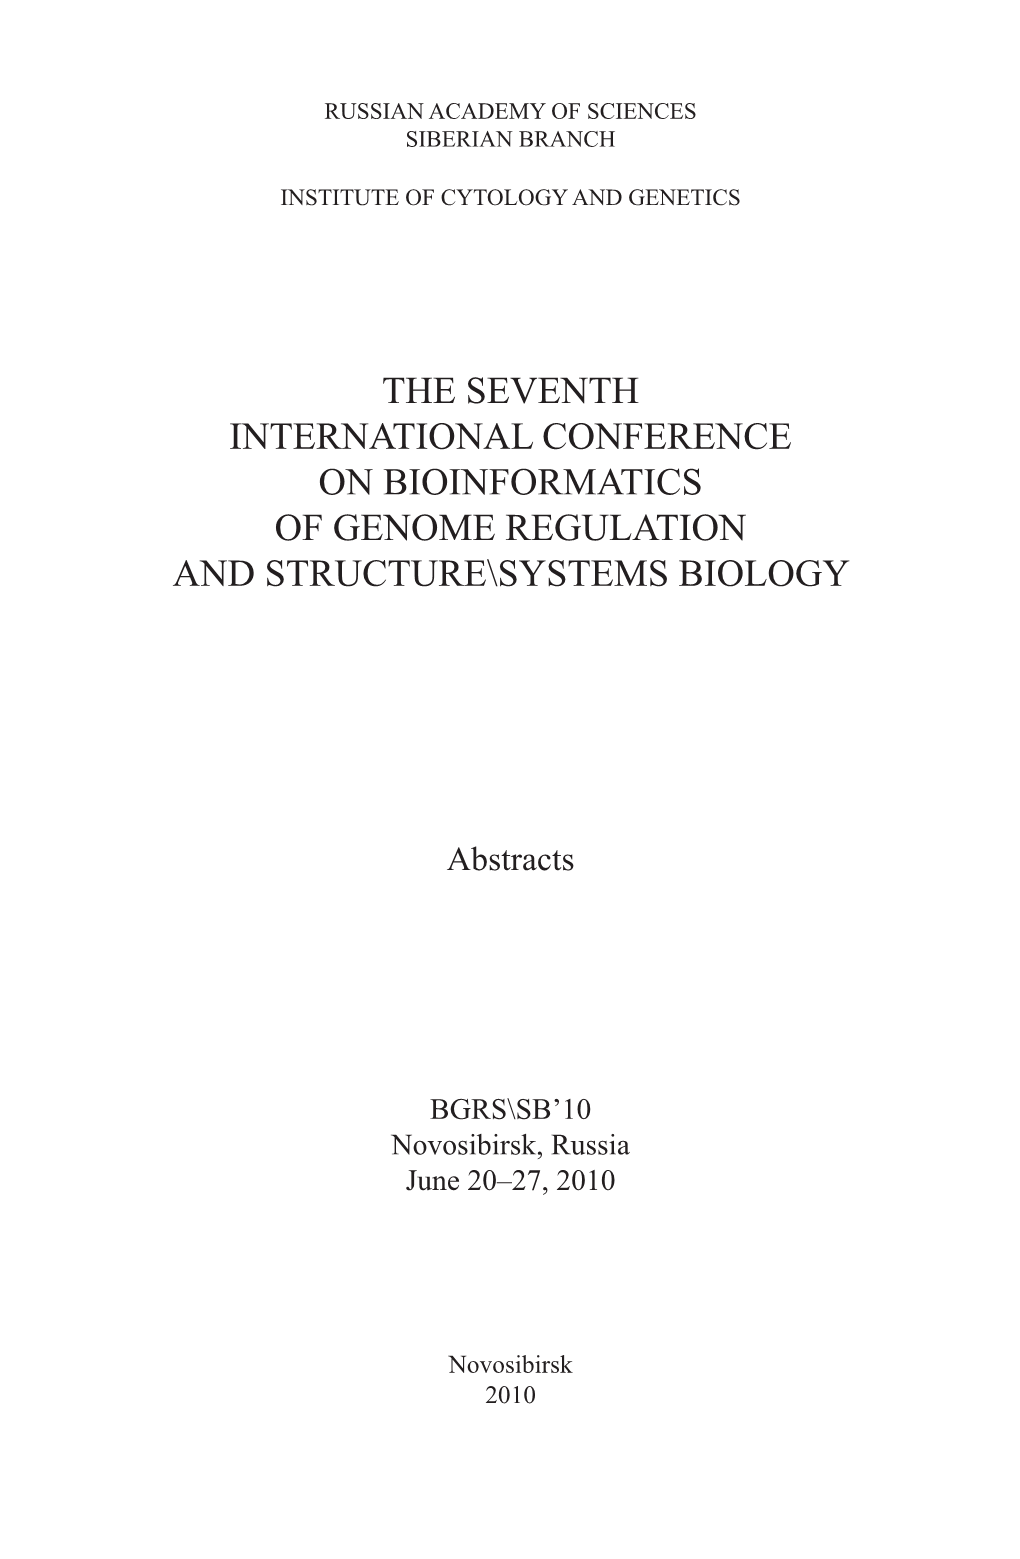 The Seventh International Conference on Bioinformatics of Genome Regulation and Structure\Systems Biology